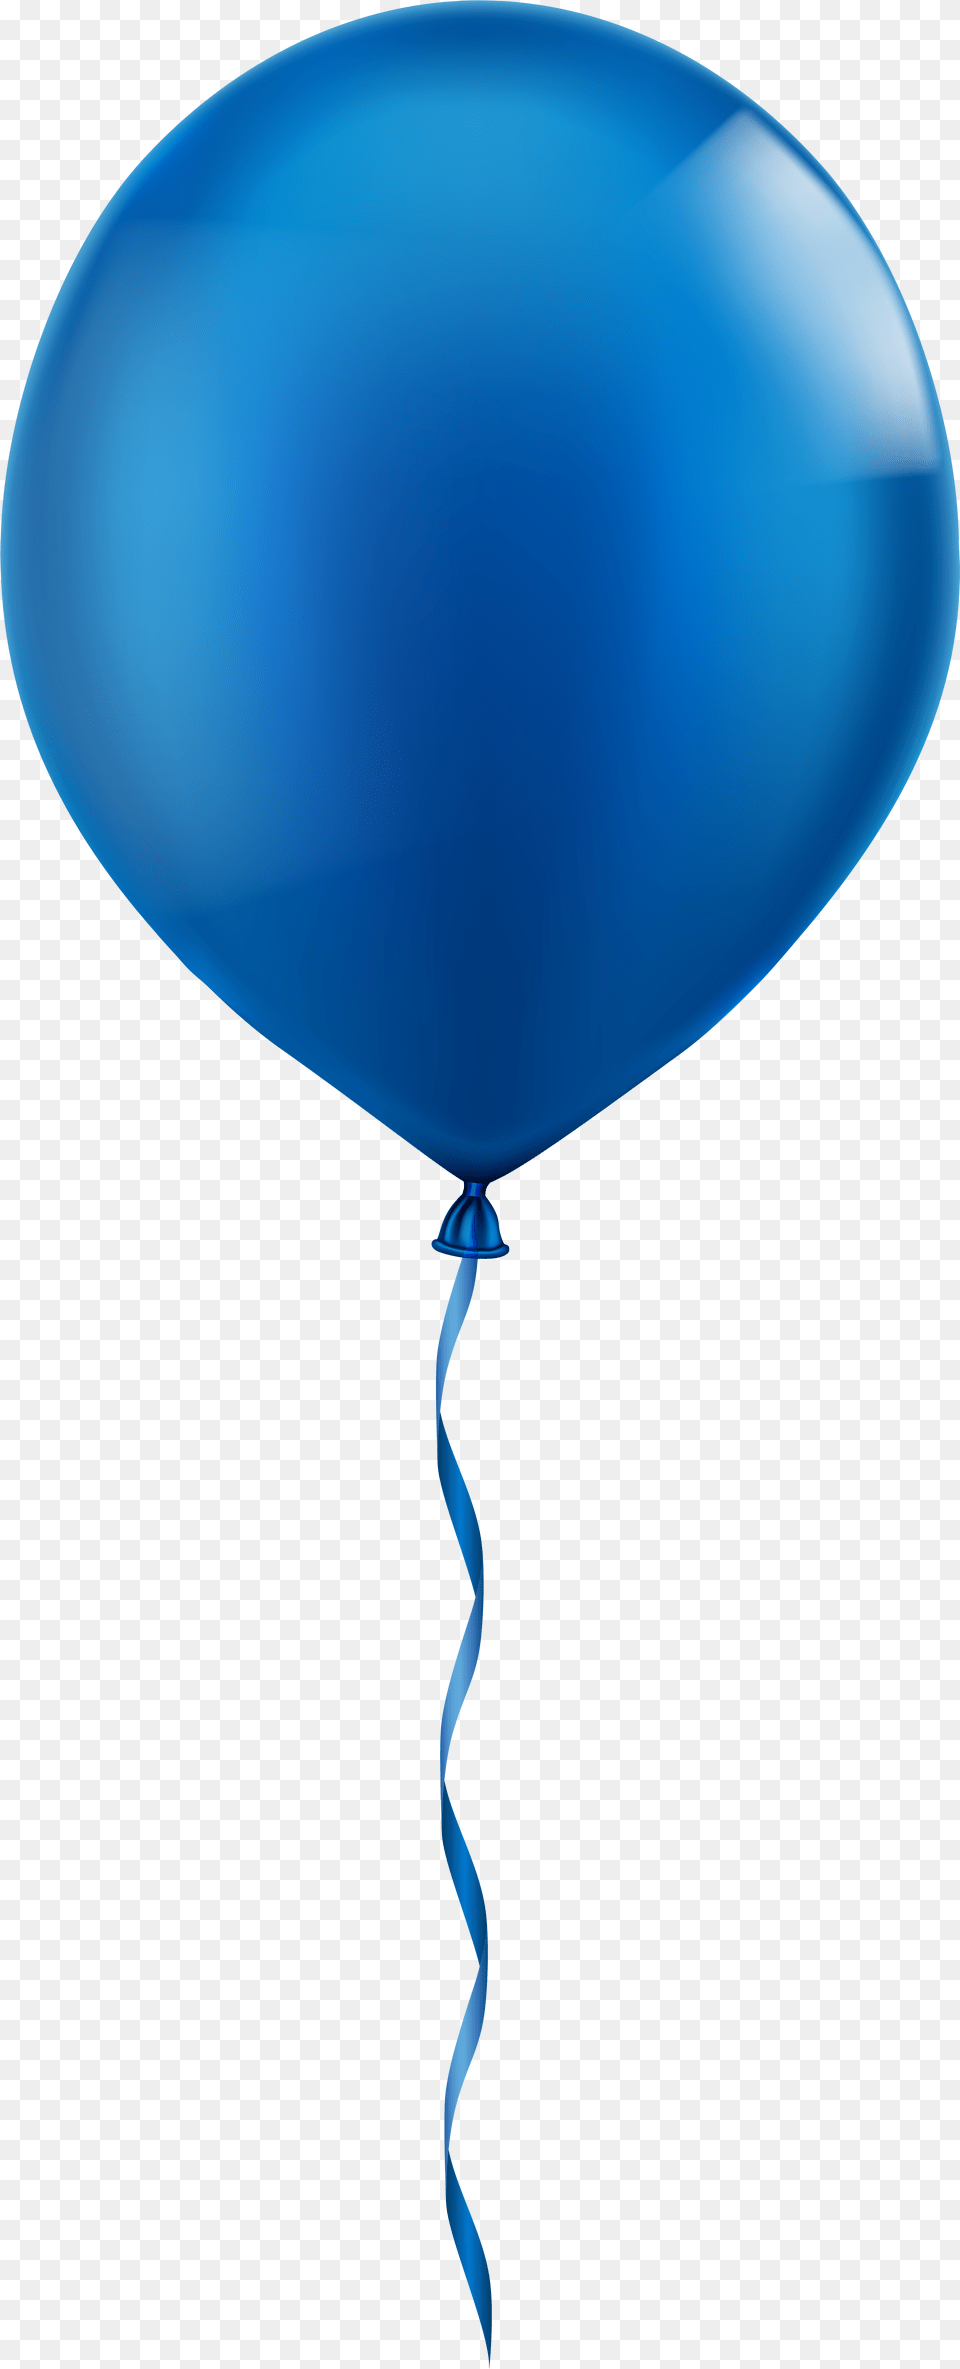 Blue Balloon Download Transparent Background Blue Balloon Png Image